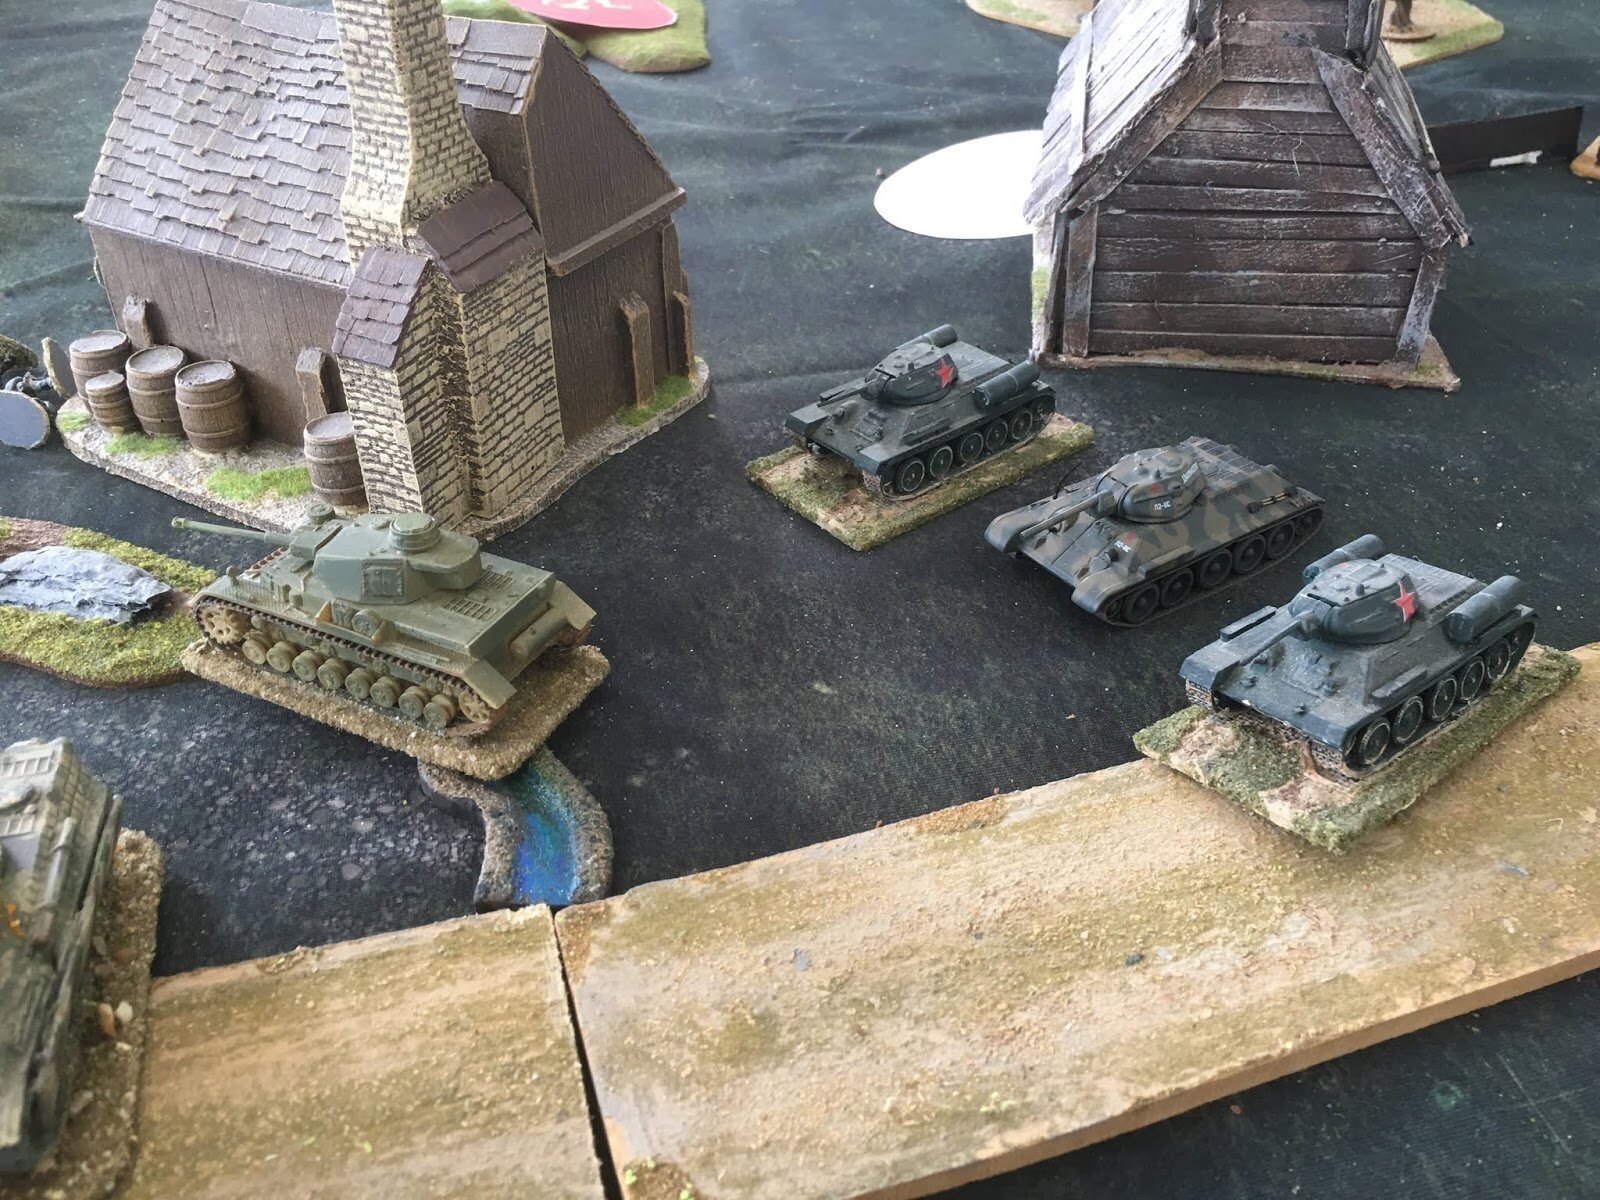 And another three T-34s dash into action just as the Panzers have turned to face the Soviet heavy tank behind them